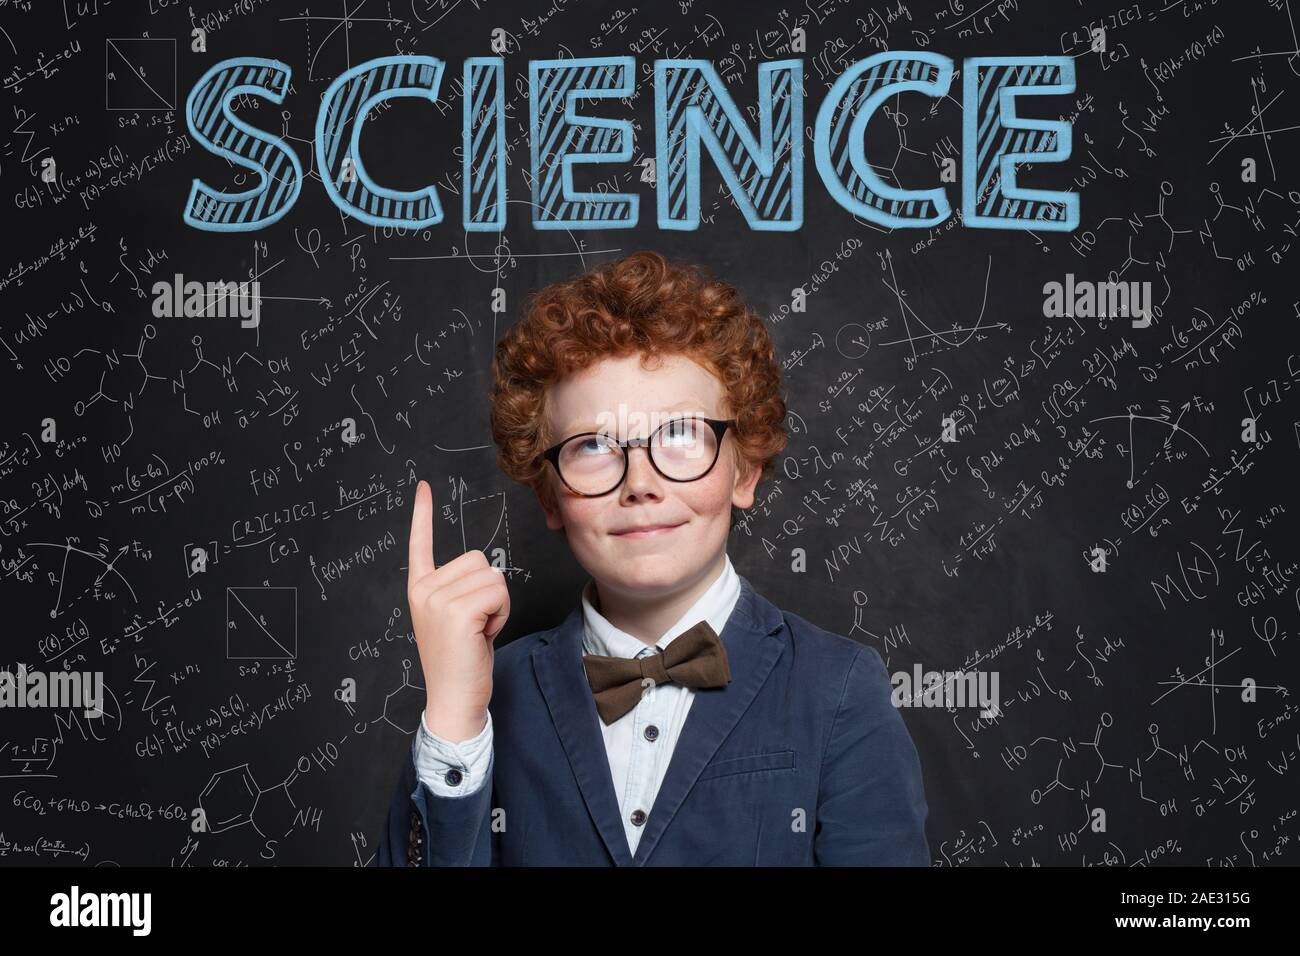 Smart confident kid boy with red hair pointing up at science inscription on chalkkboard Stock Photo